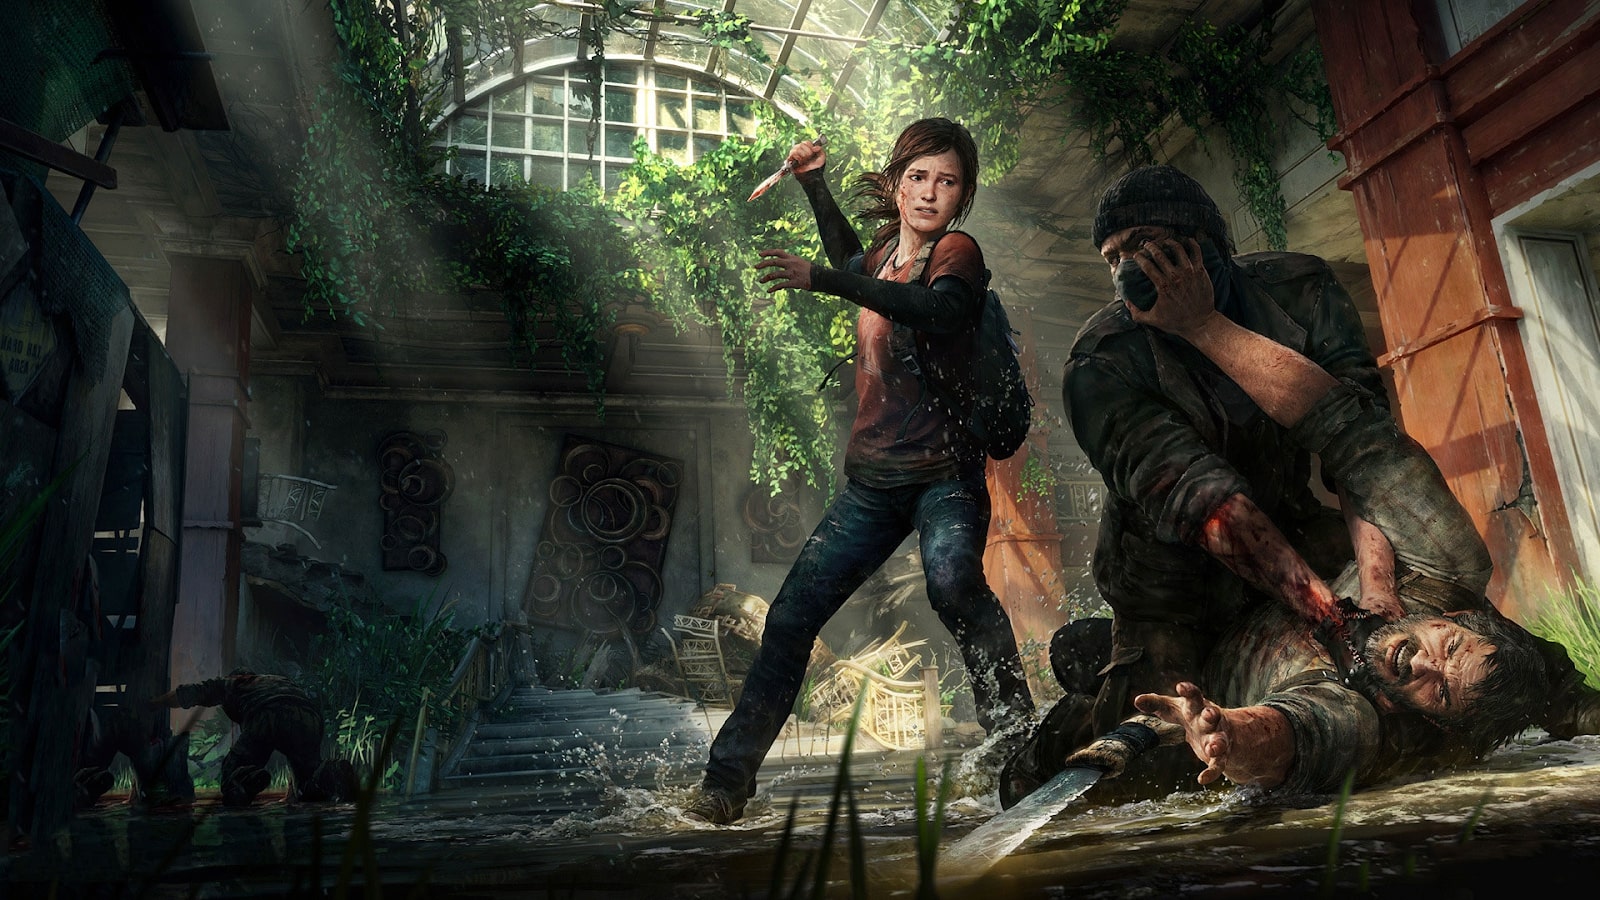 the Last of Us Part II — a Definitive Masterpiece to End the PS4 Era